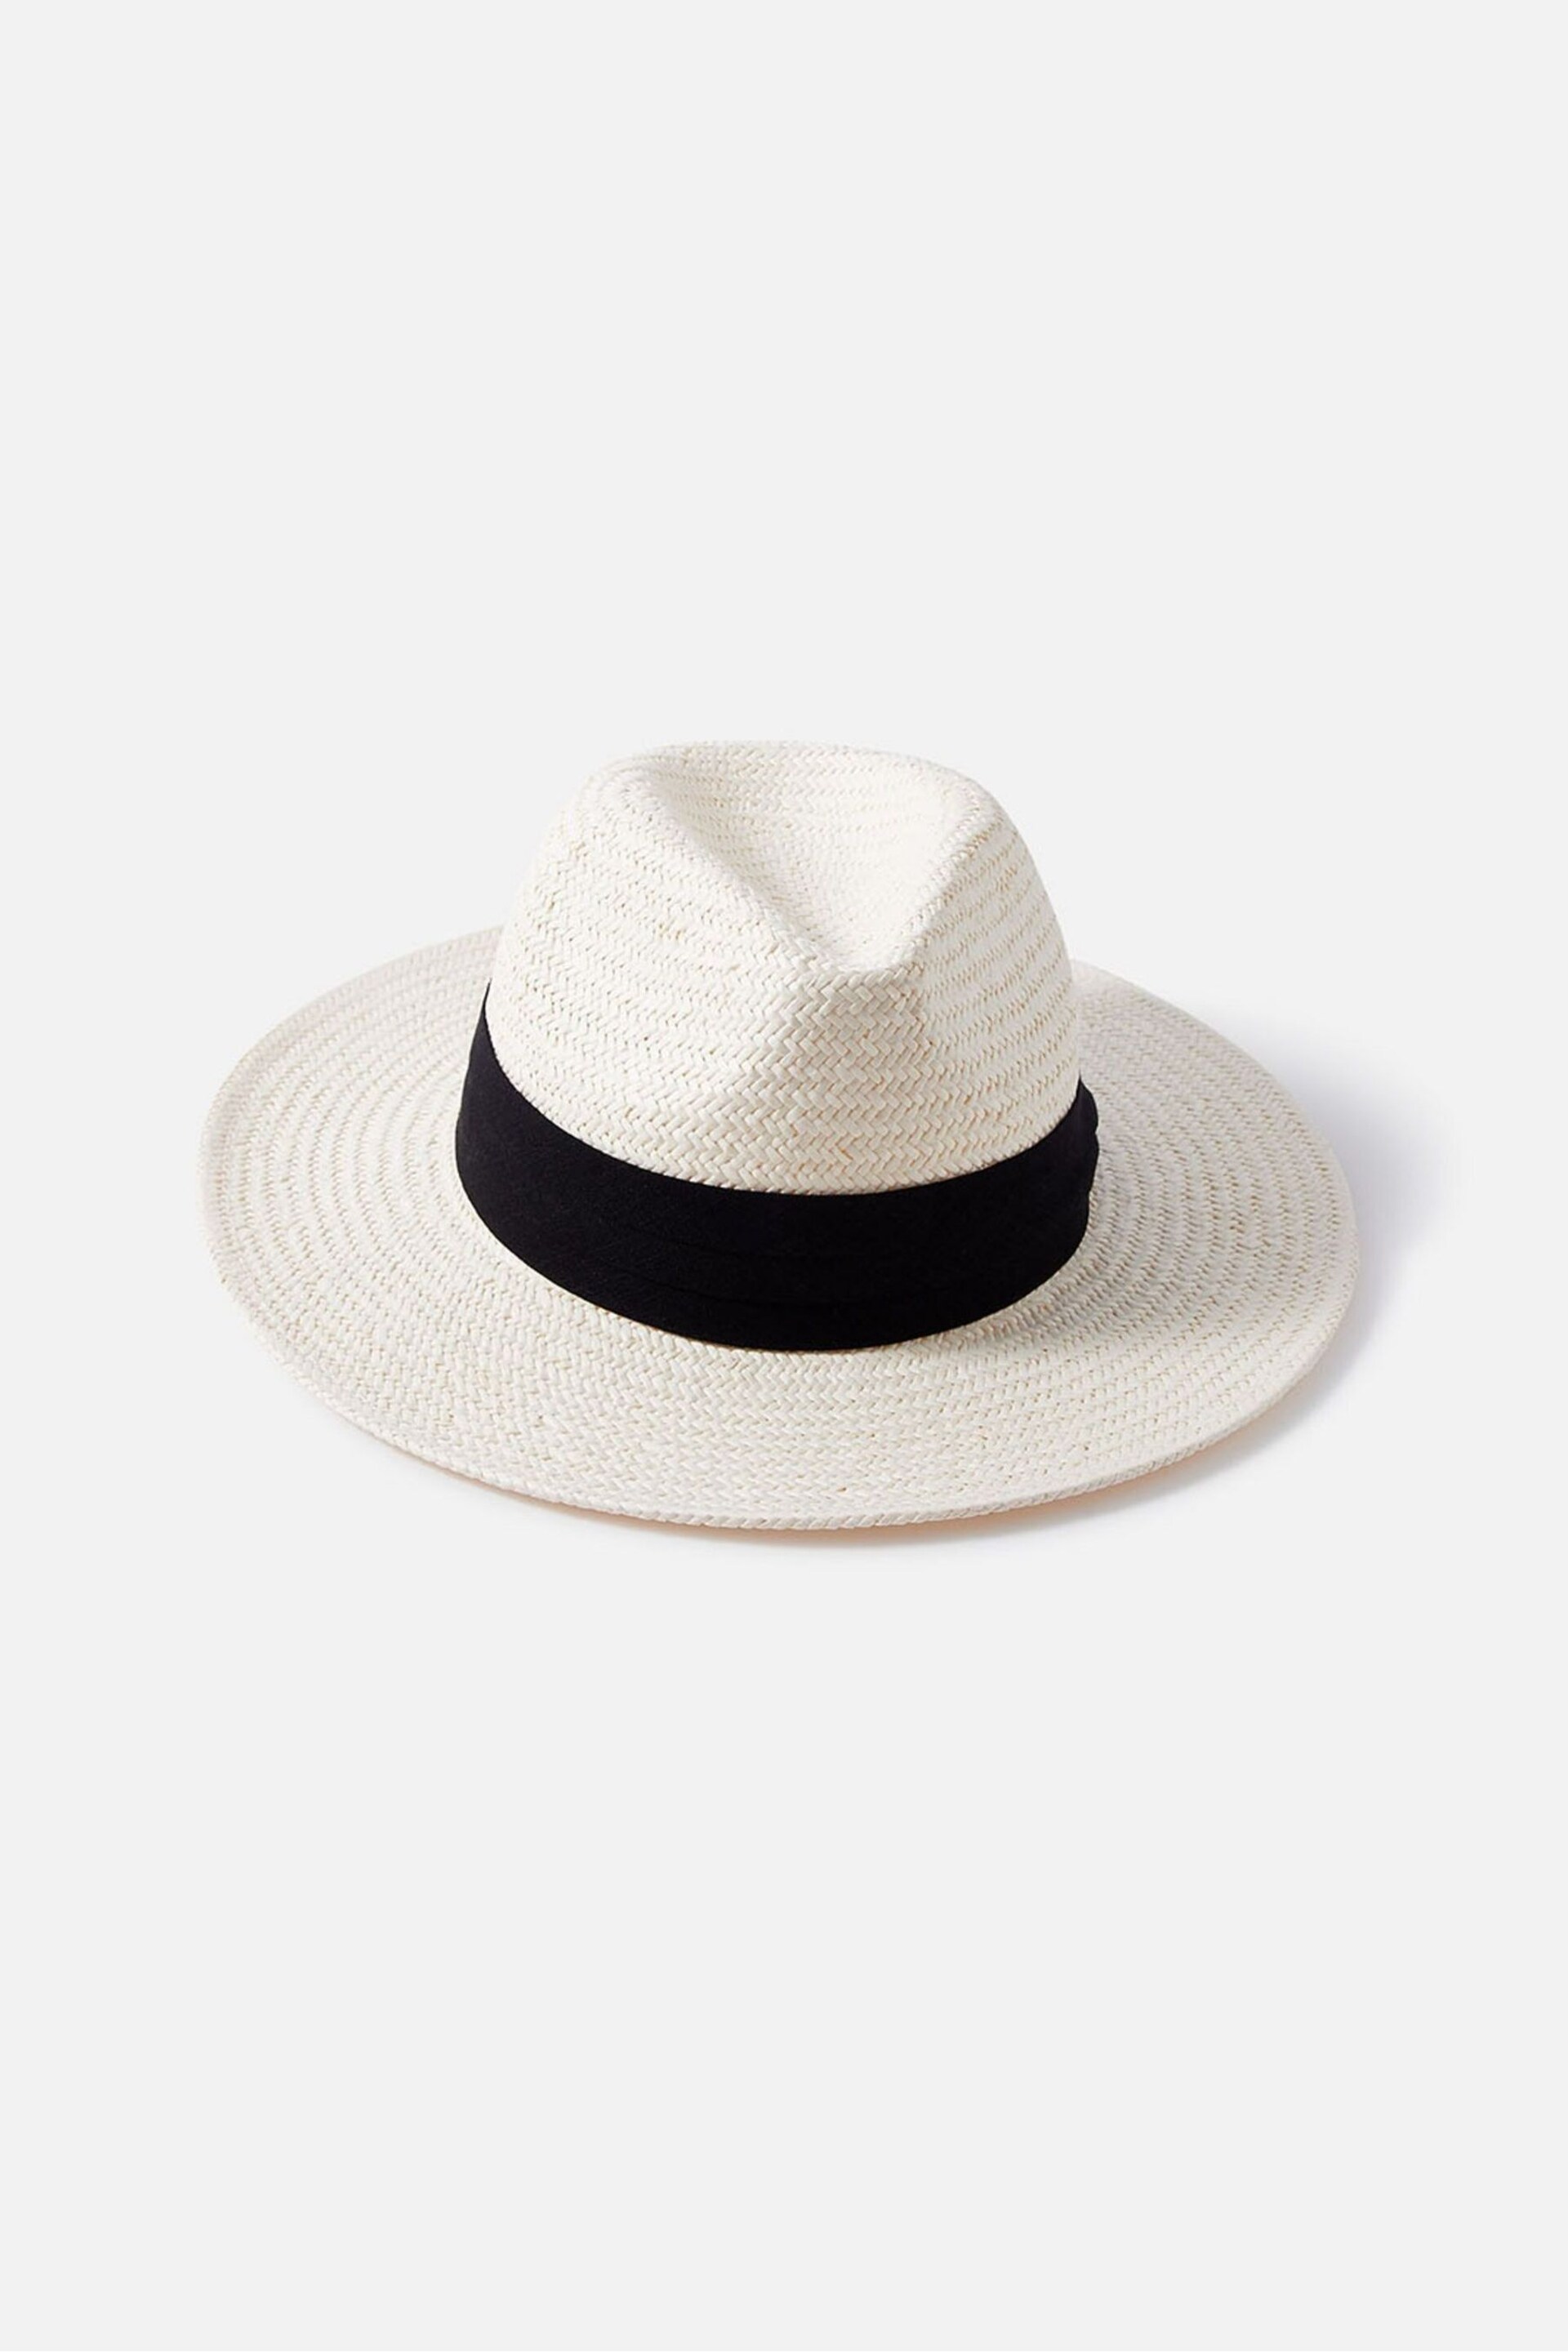 Accessorize White Louise Fedora Hat - Image 2 of 3